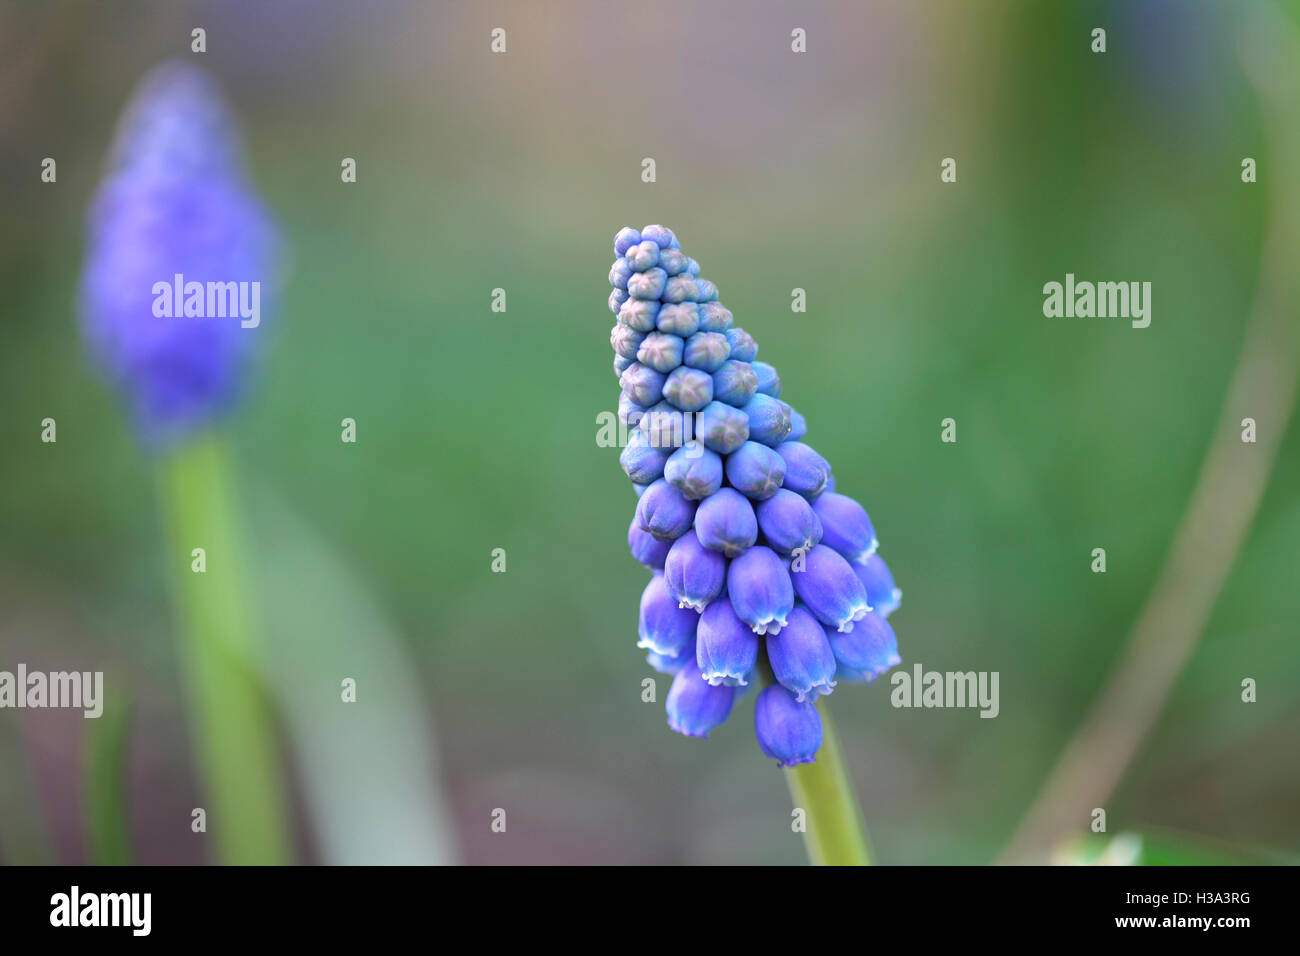 early giant, muscari - distinctive bell-shaped flowering spike of early spring colour Jane Ann Butler Photography JABP1642 Stock Photo